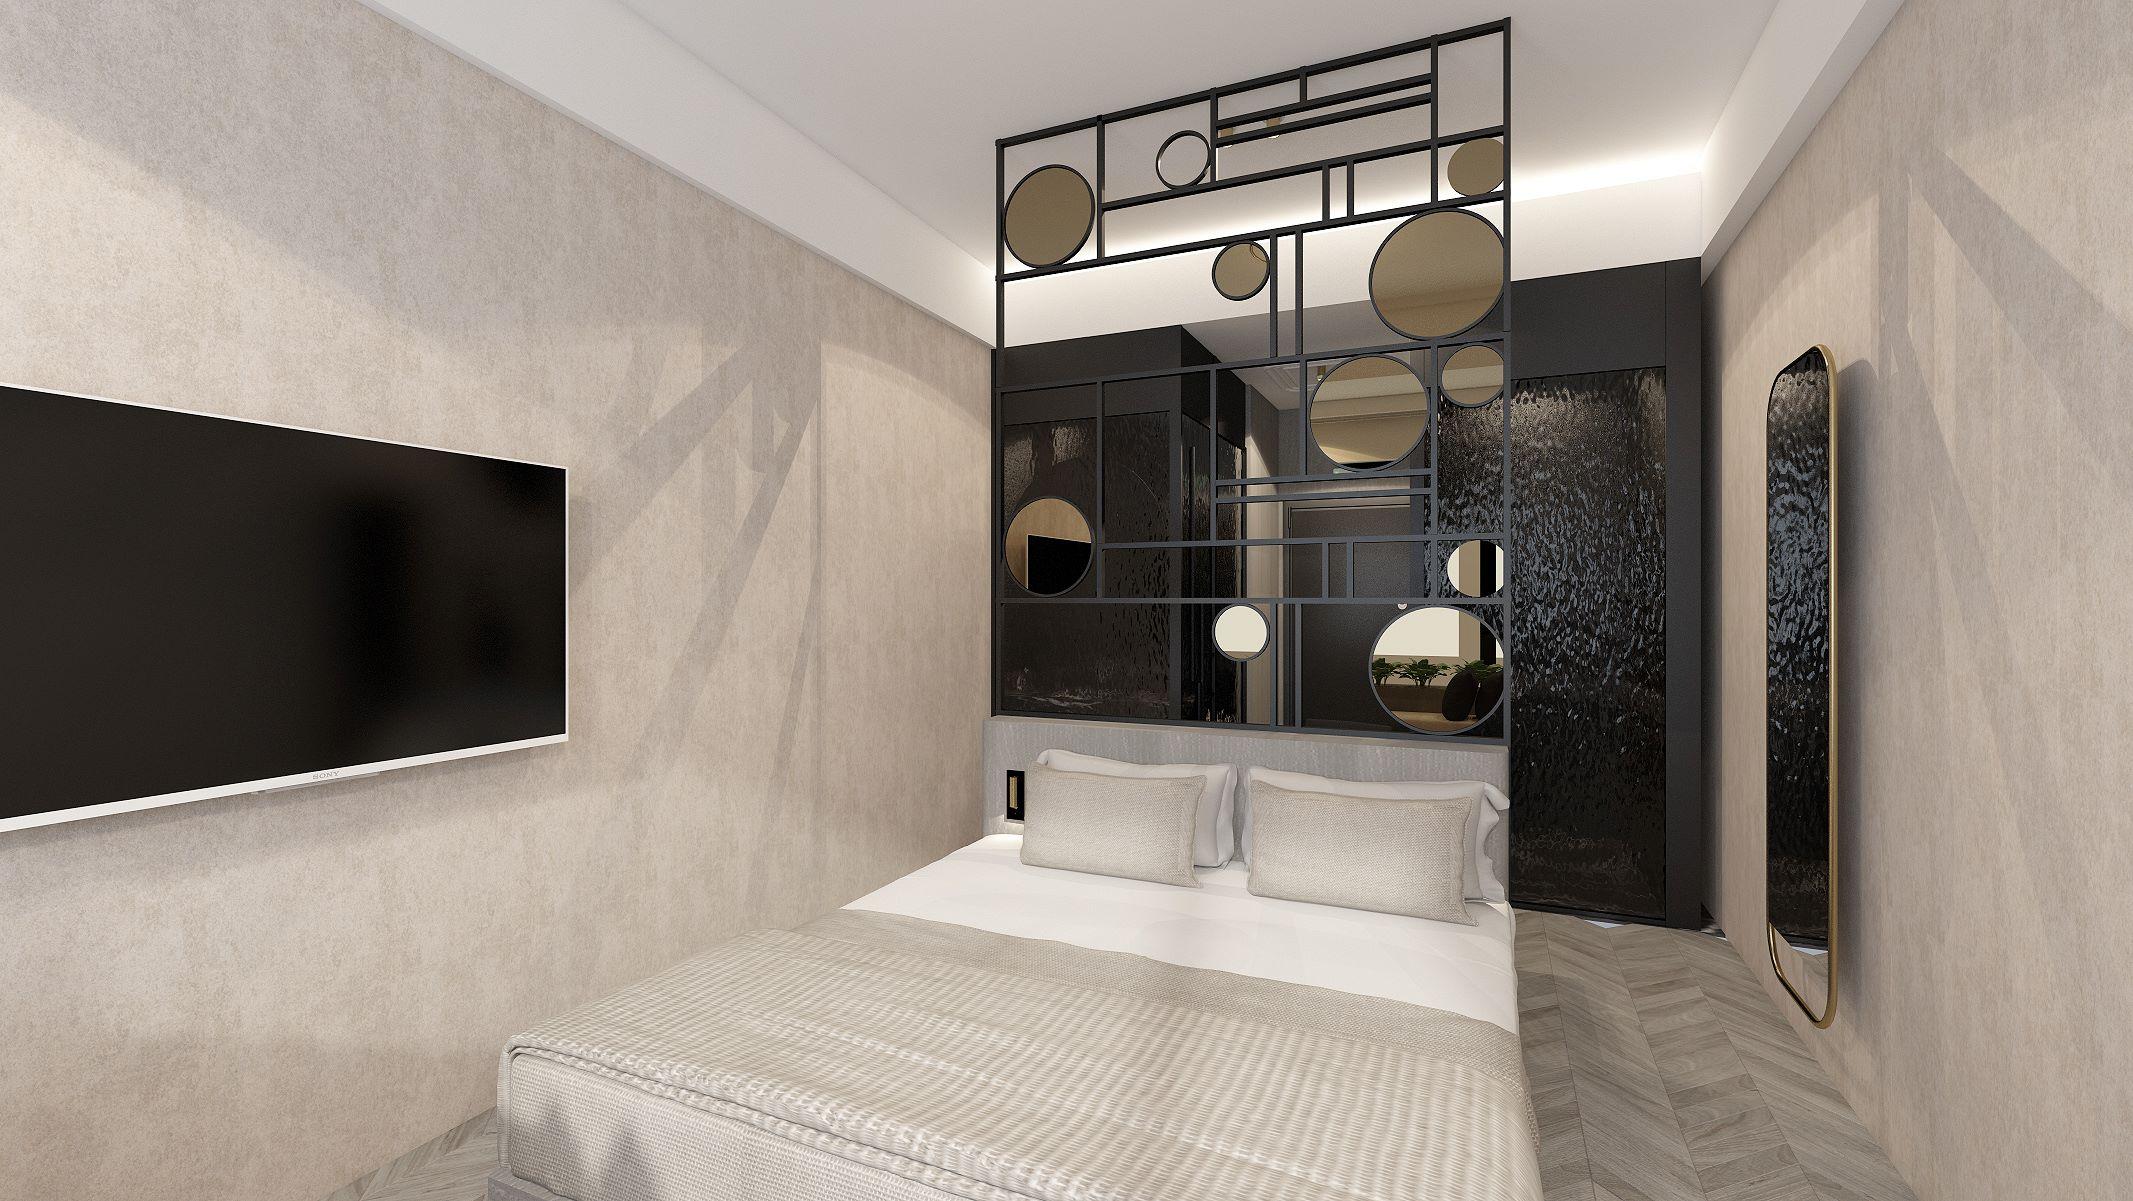 The sleek interiors of the Apollon luxury hotel room in Athens city centre by ESSE Athens in Plaka.